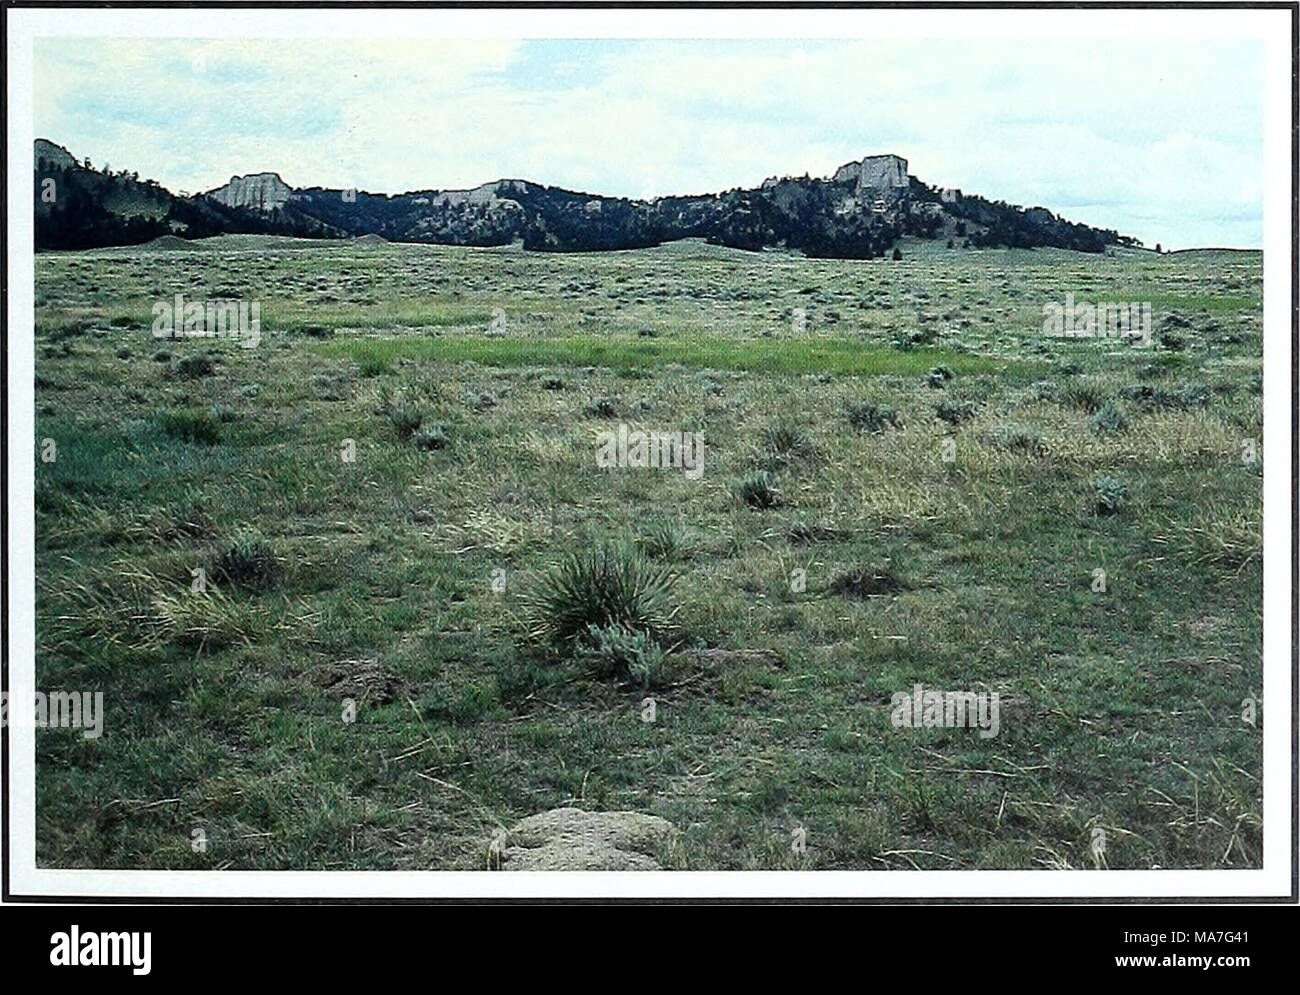 . Eighty years of vegetation and landscape changes in the Northern Great Plains : a photographic record . Synopsis Composition of plant species is similar to that in 1960 descrip- tion. Present grass and grasslike composition is estimated as 60 percent Carex, Stipa, and Bouteloua; 30 percent Koeleria, Poa, and Aristida; and 10 per- cent Calamovilfa and Andropogon. One distinct differ- ence is the absence of the Bouteloua hirsuta recorded in 1960. Density and cover of Pinus ponderosa has continued to steadily increase since 1909. Pocket gopher activity is visible in the 1998 photo. Notes also i Stock Photo